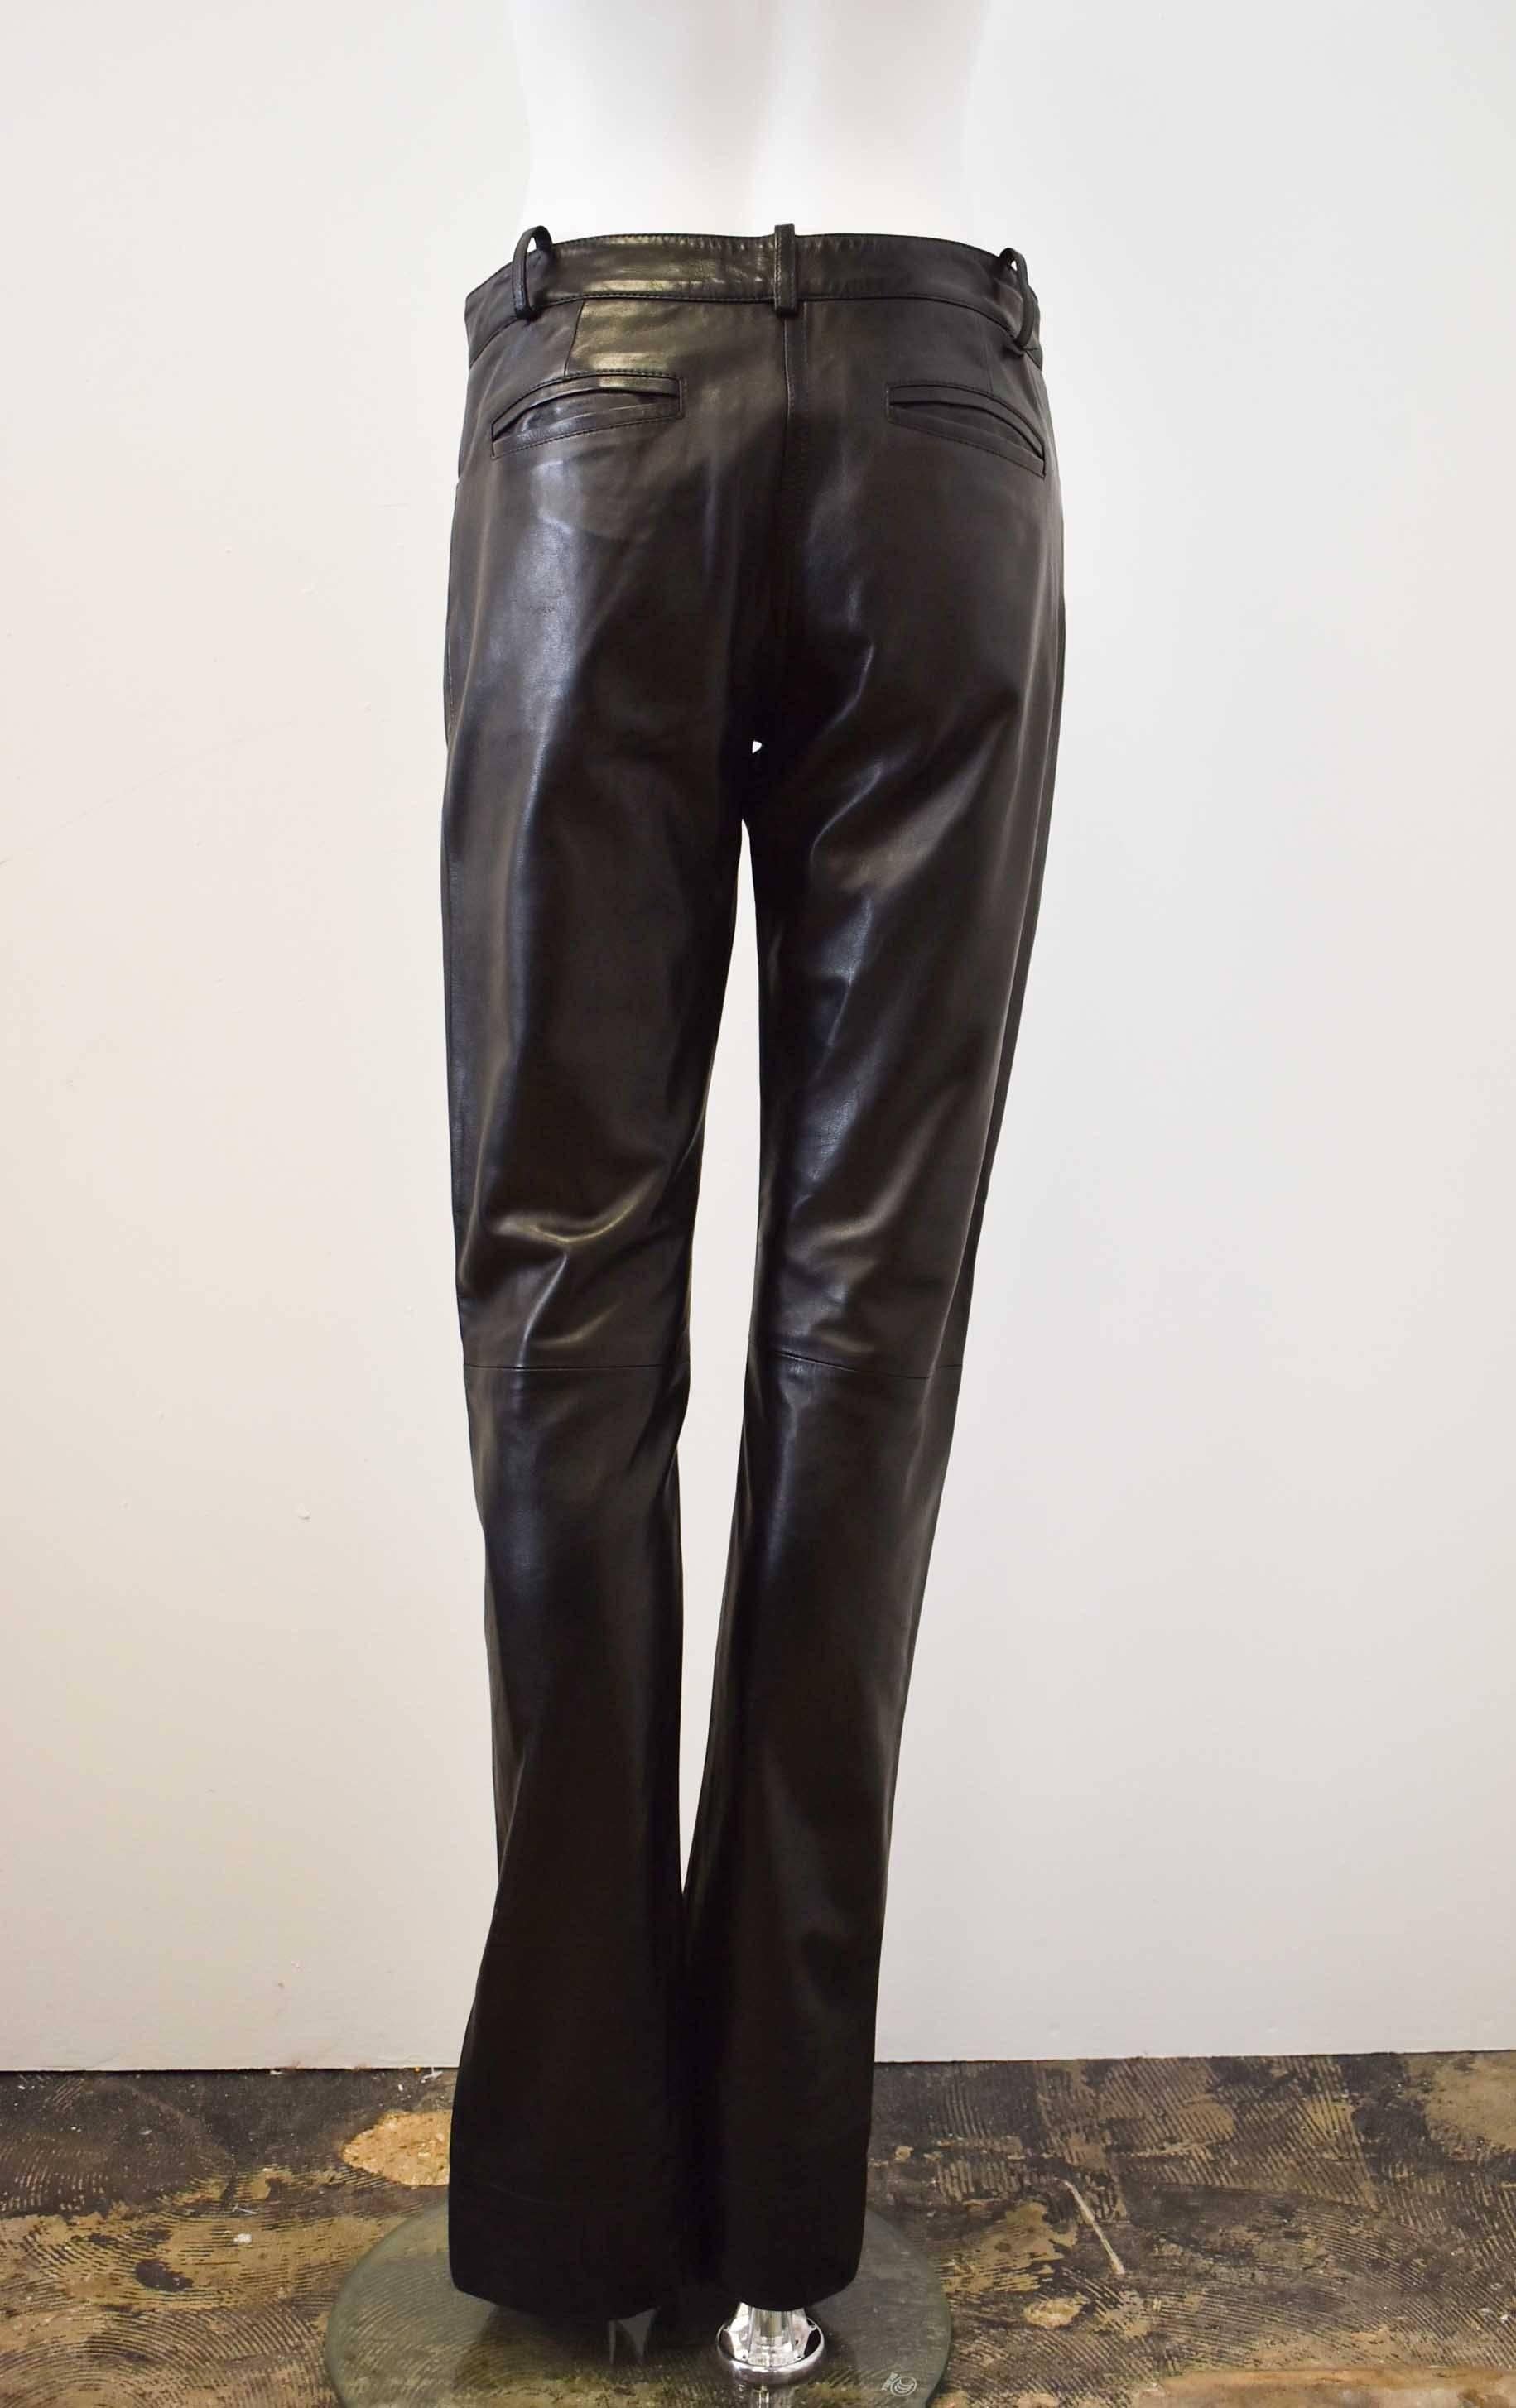 Women's Celine Soft Black Leather Trousers with Side Slit Details